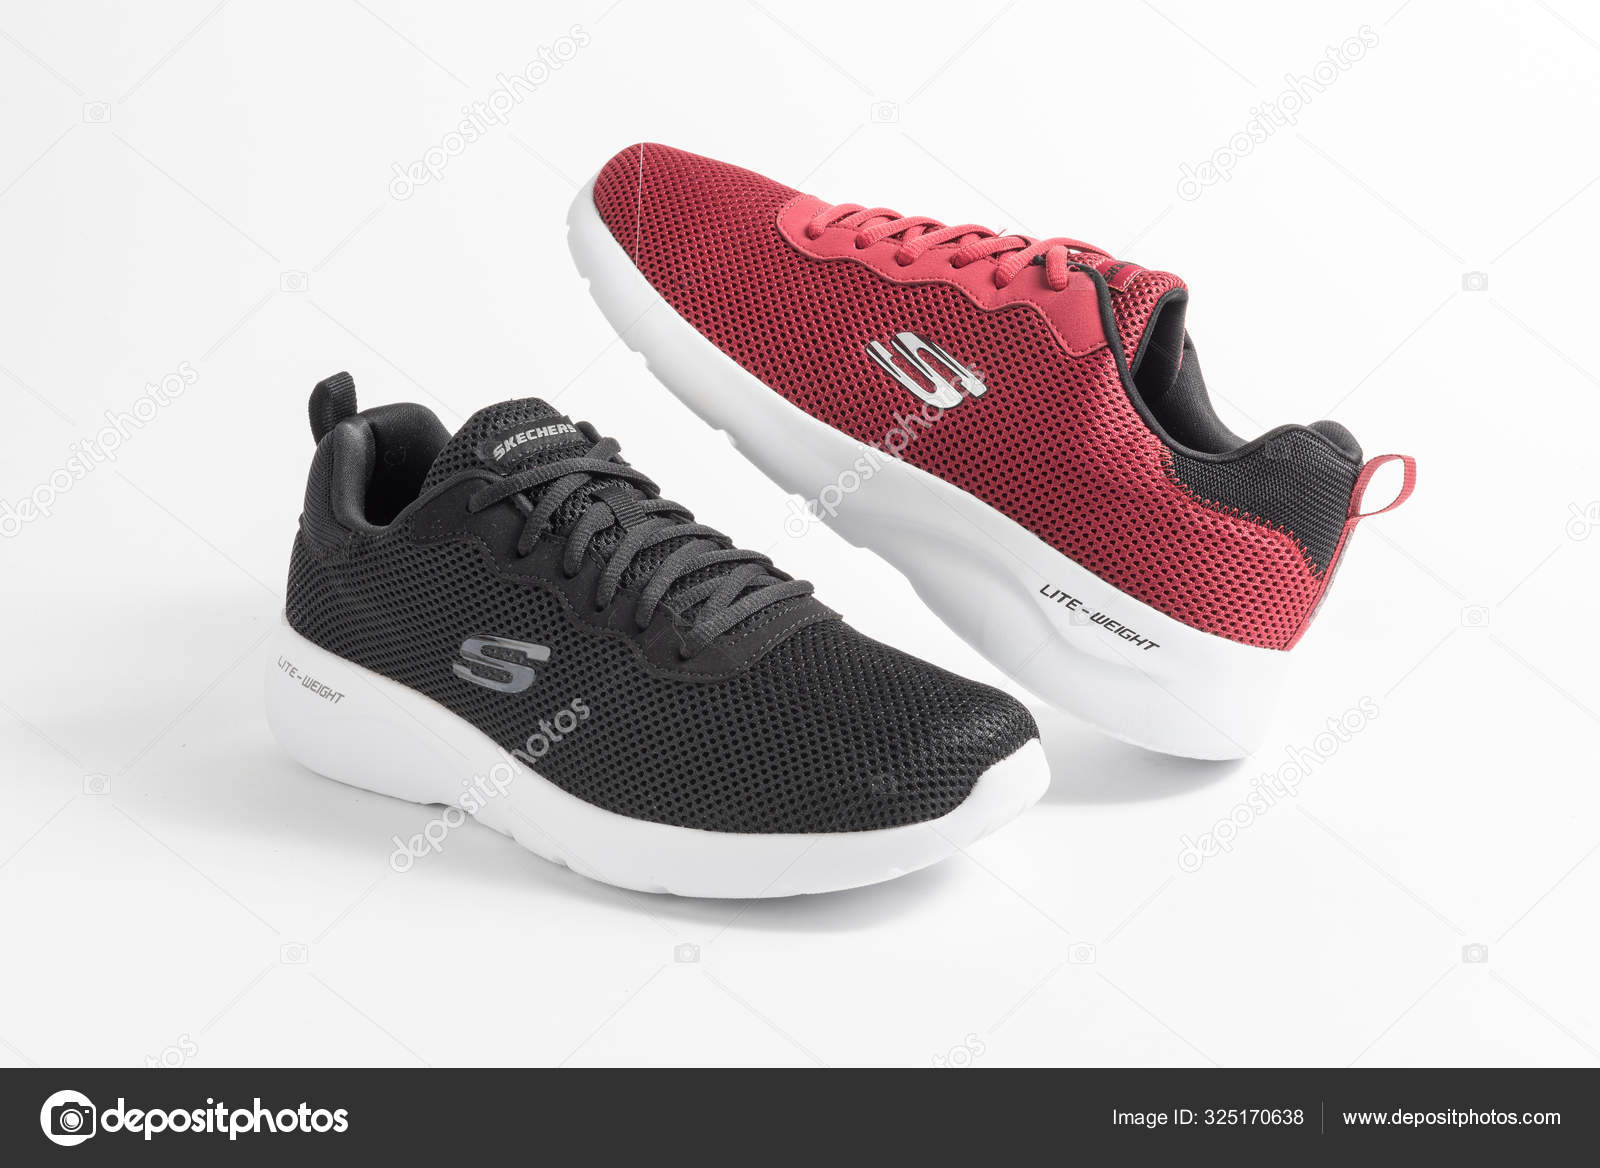 skechers shoes image